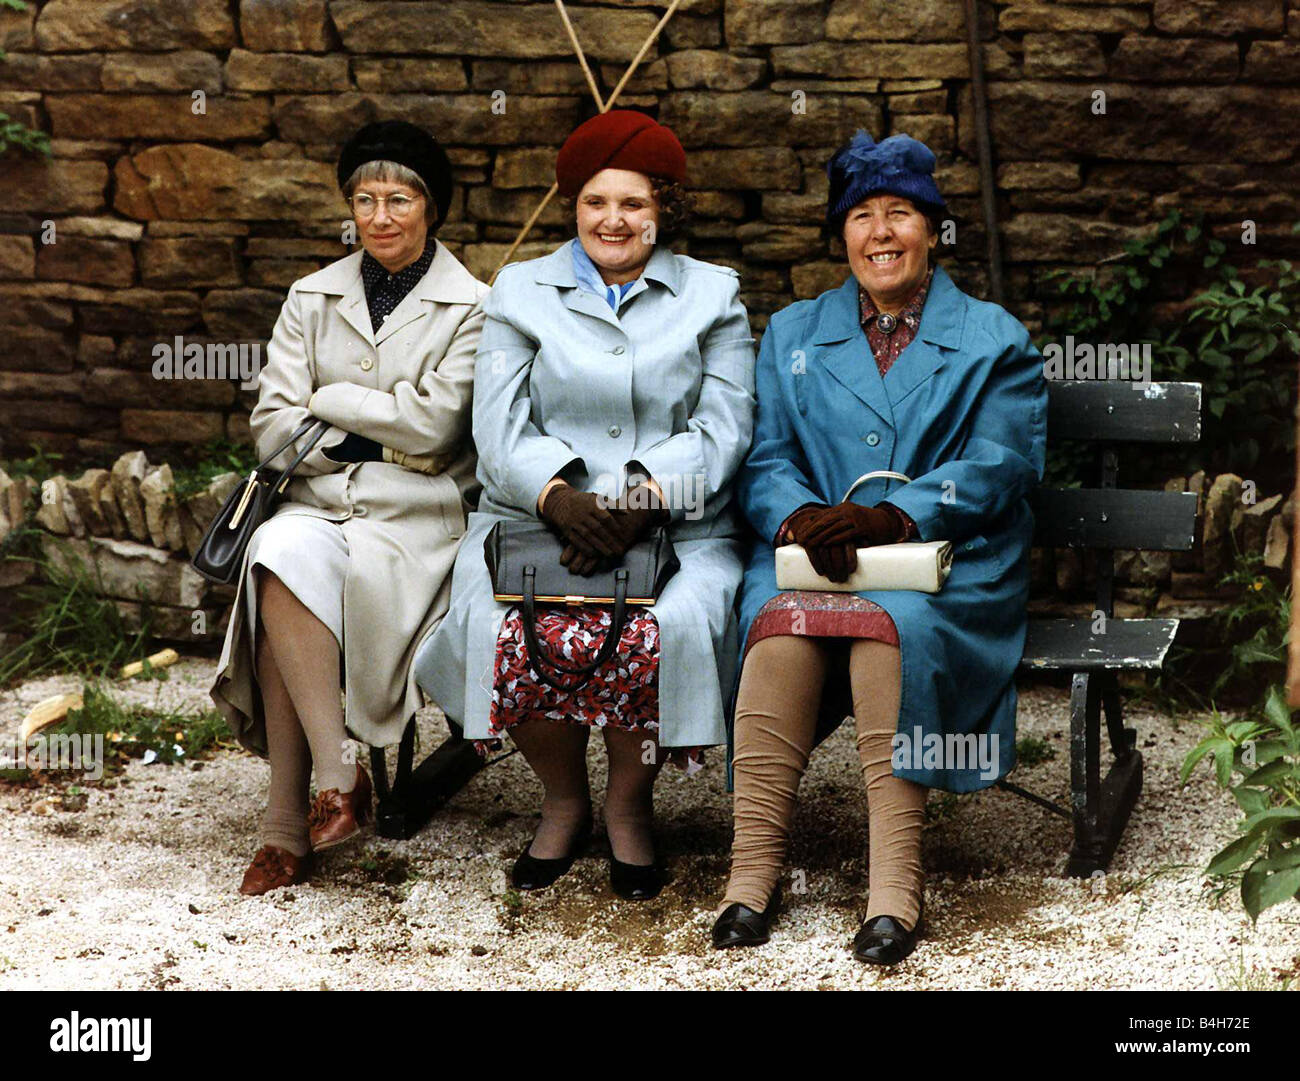 Kathy Staff actress stars in LAST OF THE SUMMER WINE plays NORA BATTY sits on park bench with frumpy friends Stock Photo